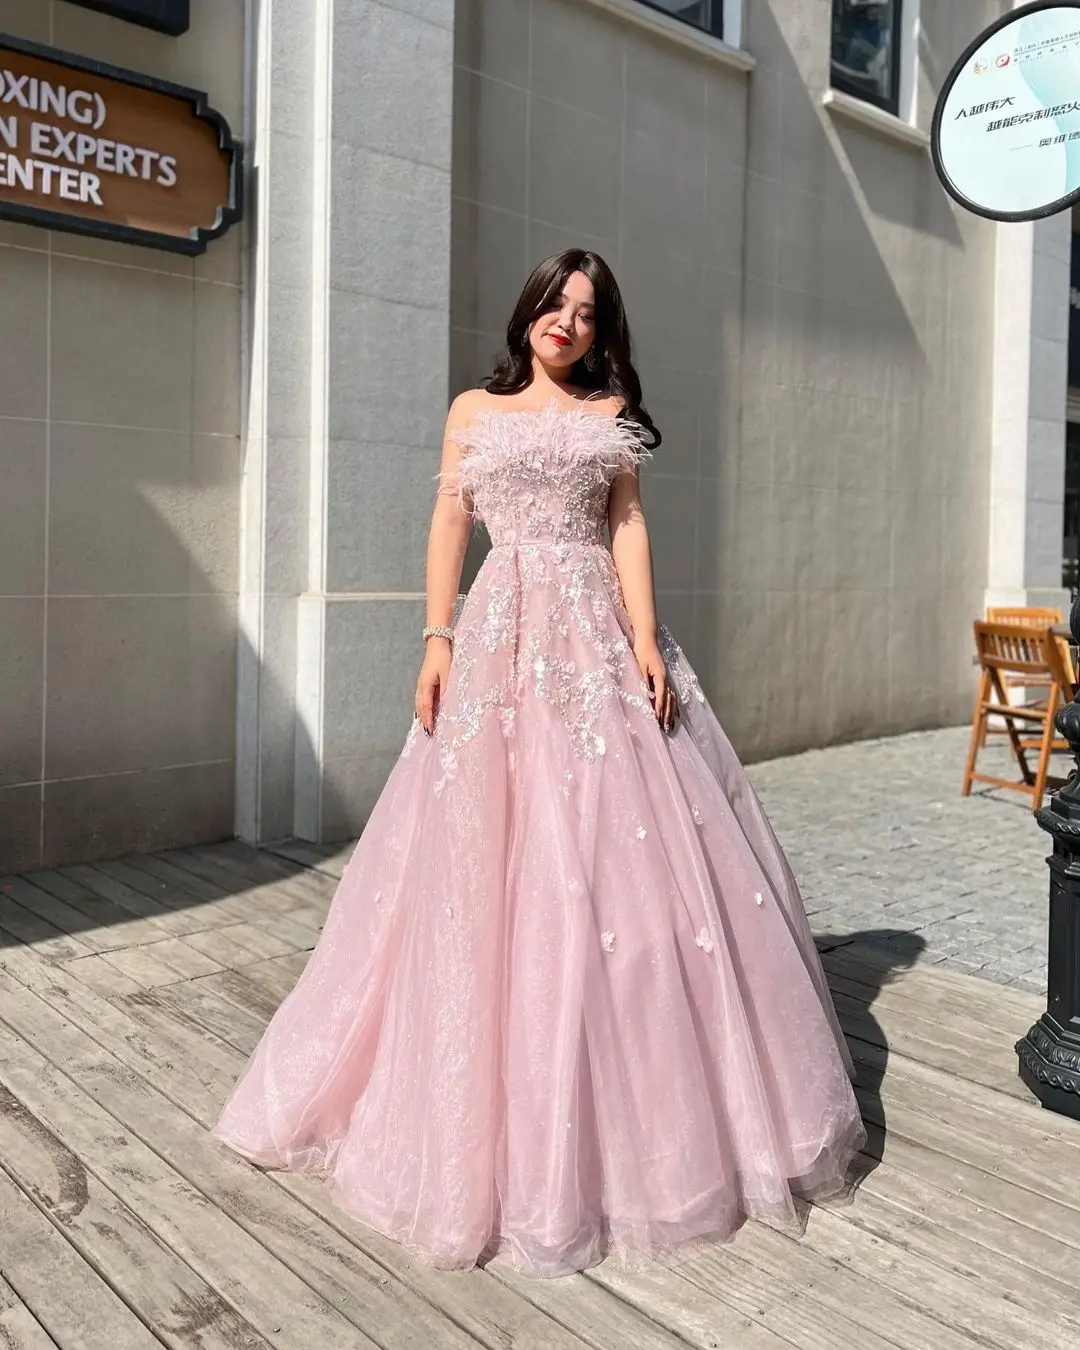 

Lace Appliques Beading Pink Prom Dress Off the Shoulder Evening Dresses Party Gowns for Women Balll Gown Floor Length